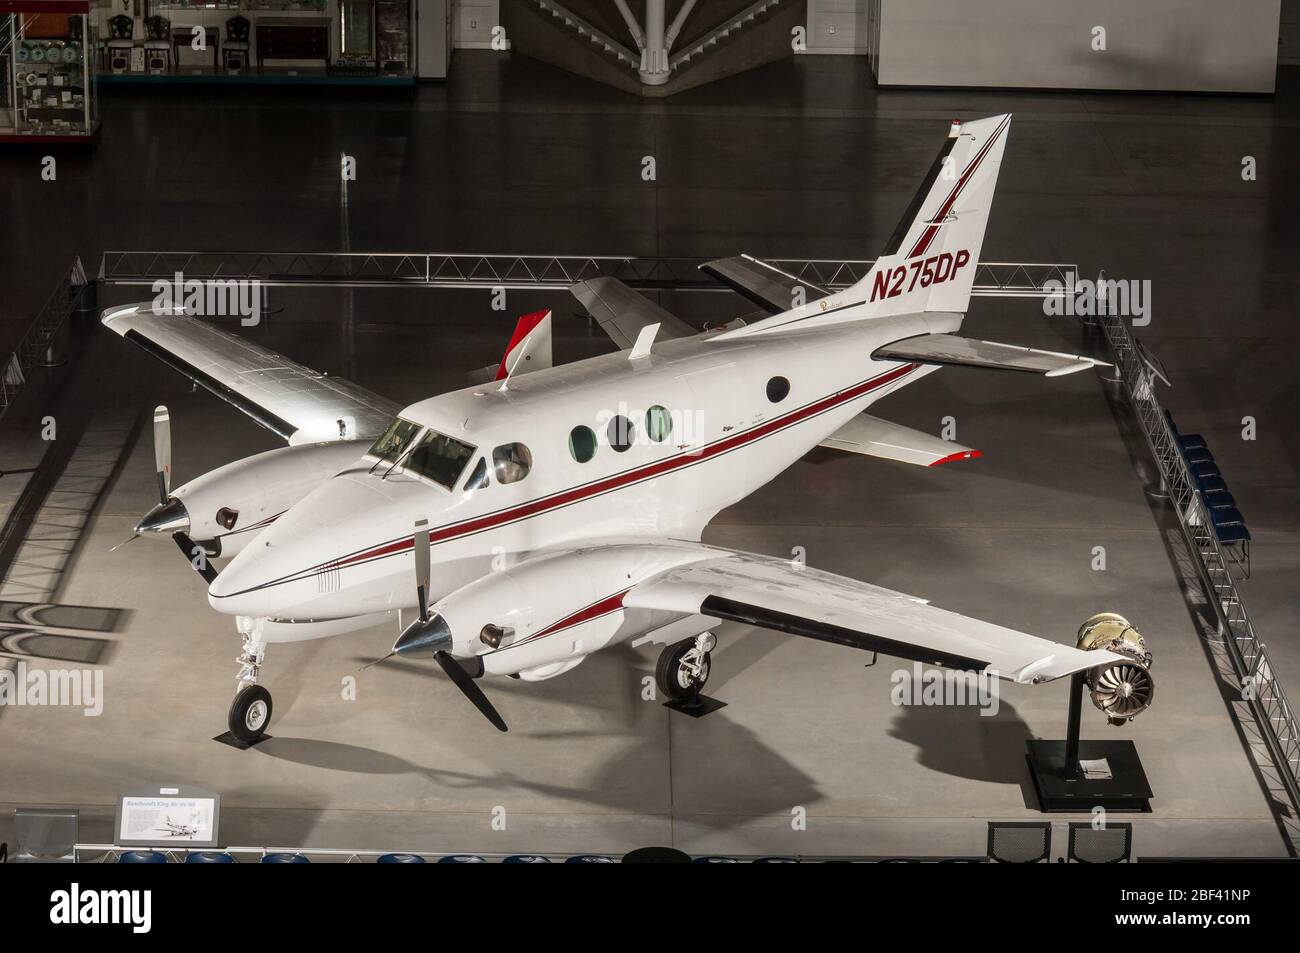 Beechcraft King Air 6590. Seven/ten place, low-wing, twin-turboprop business aircraft; white with red and gray trim. Pratt and Whitney Canada PT6A-6 engines.The Beechcraft King Air is the world's most popular turboprop aircraft. Stock Photo